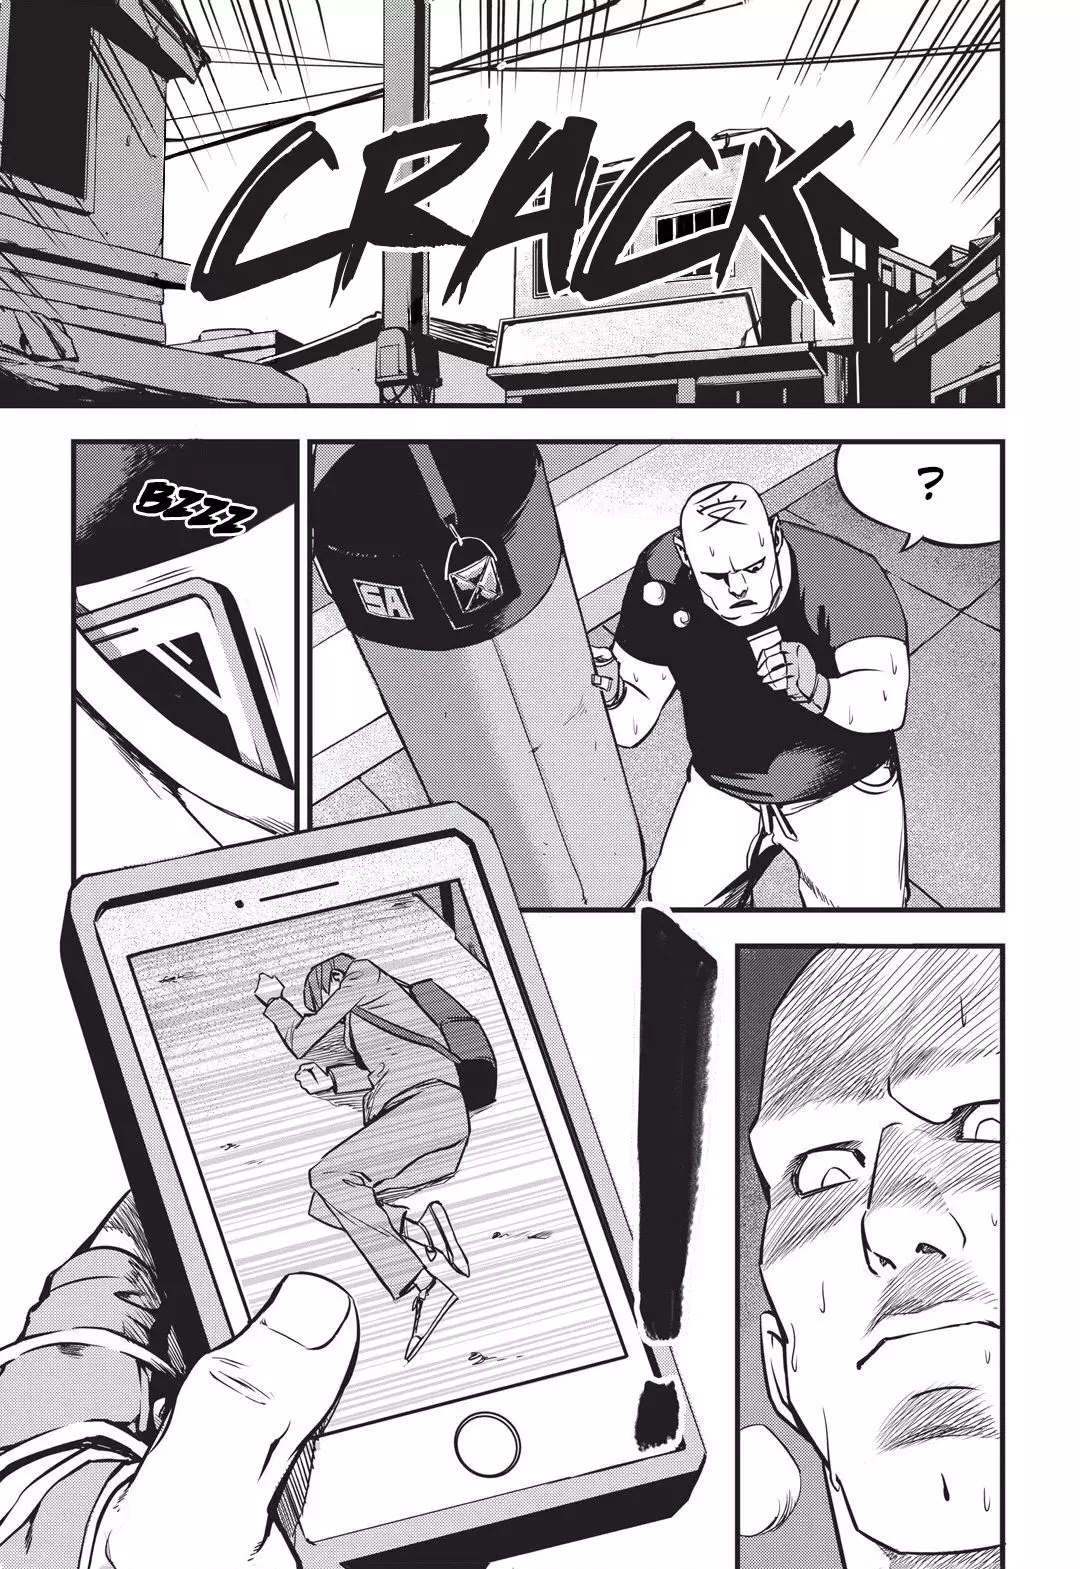 Fight Class 3 - 3 page 006